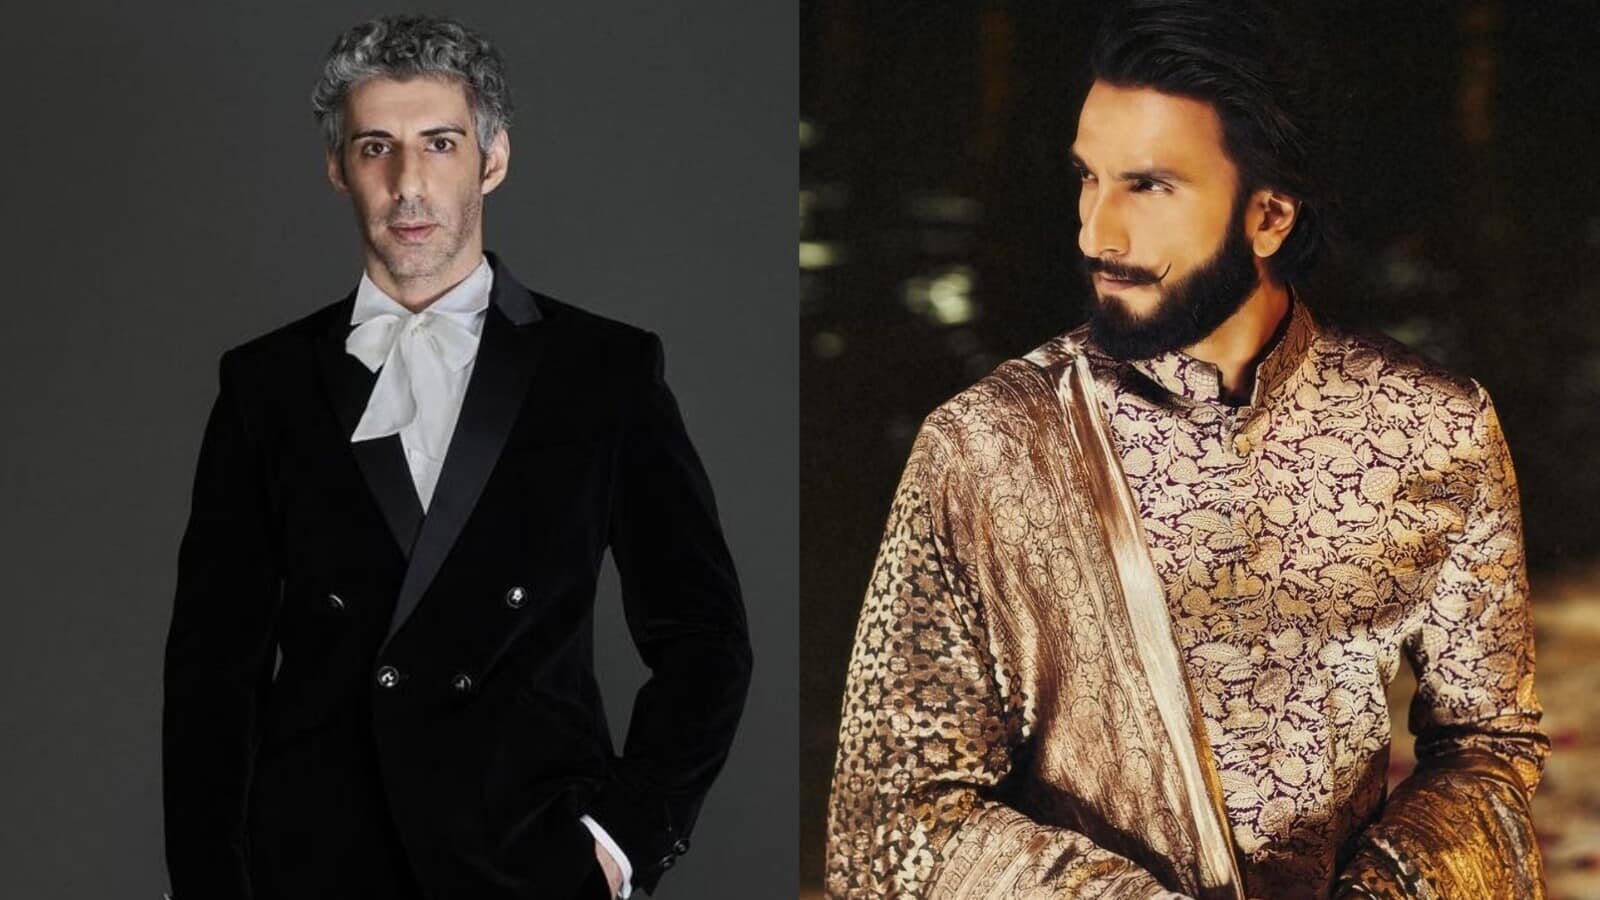 Jim Sarbh clarifies 'exaggerated' process digs weren't aimed at Ranveer